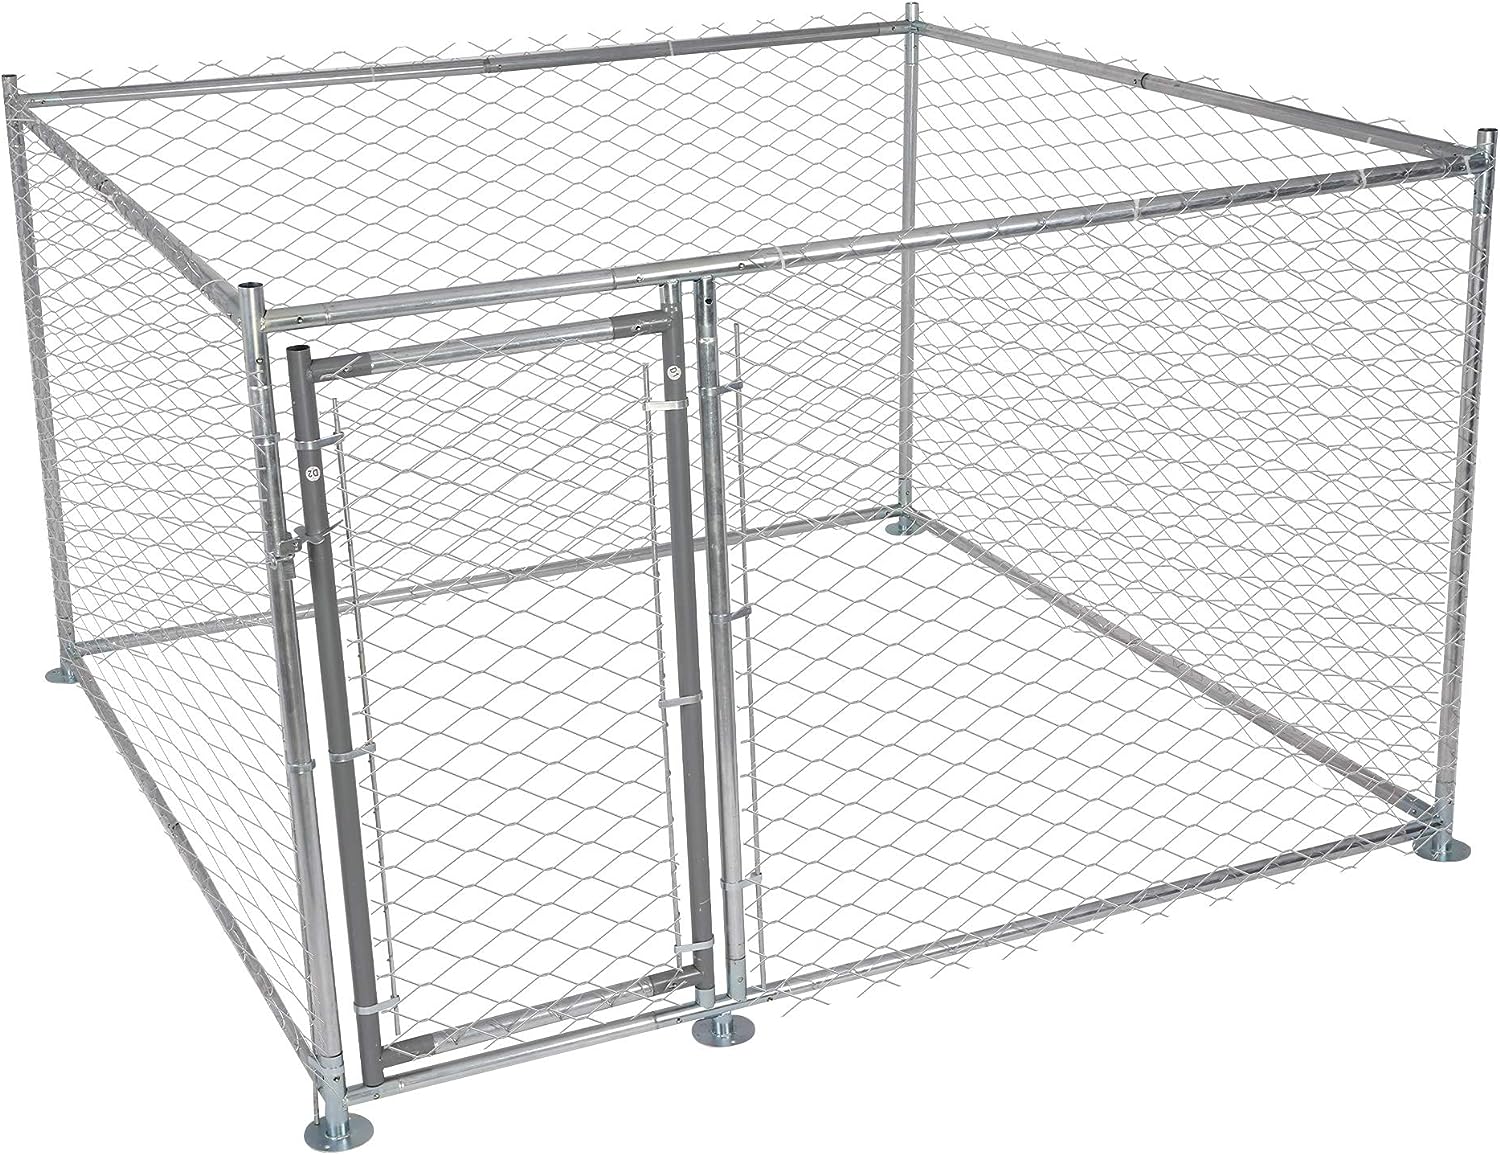 6.5'x6.5'x4' Outdoor Dog Kennel Galvanized Steel Pet Playpen with Secure Lock for Large Dog